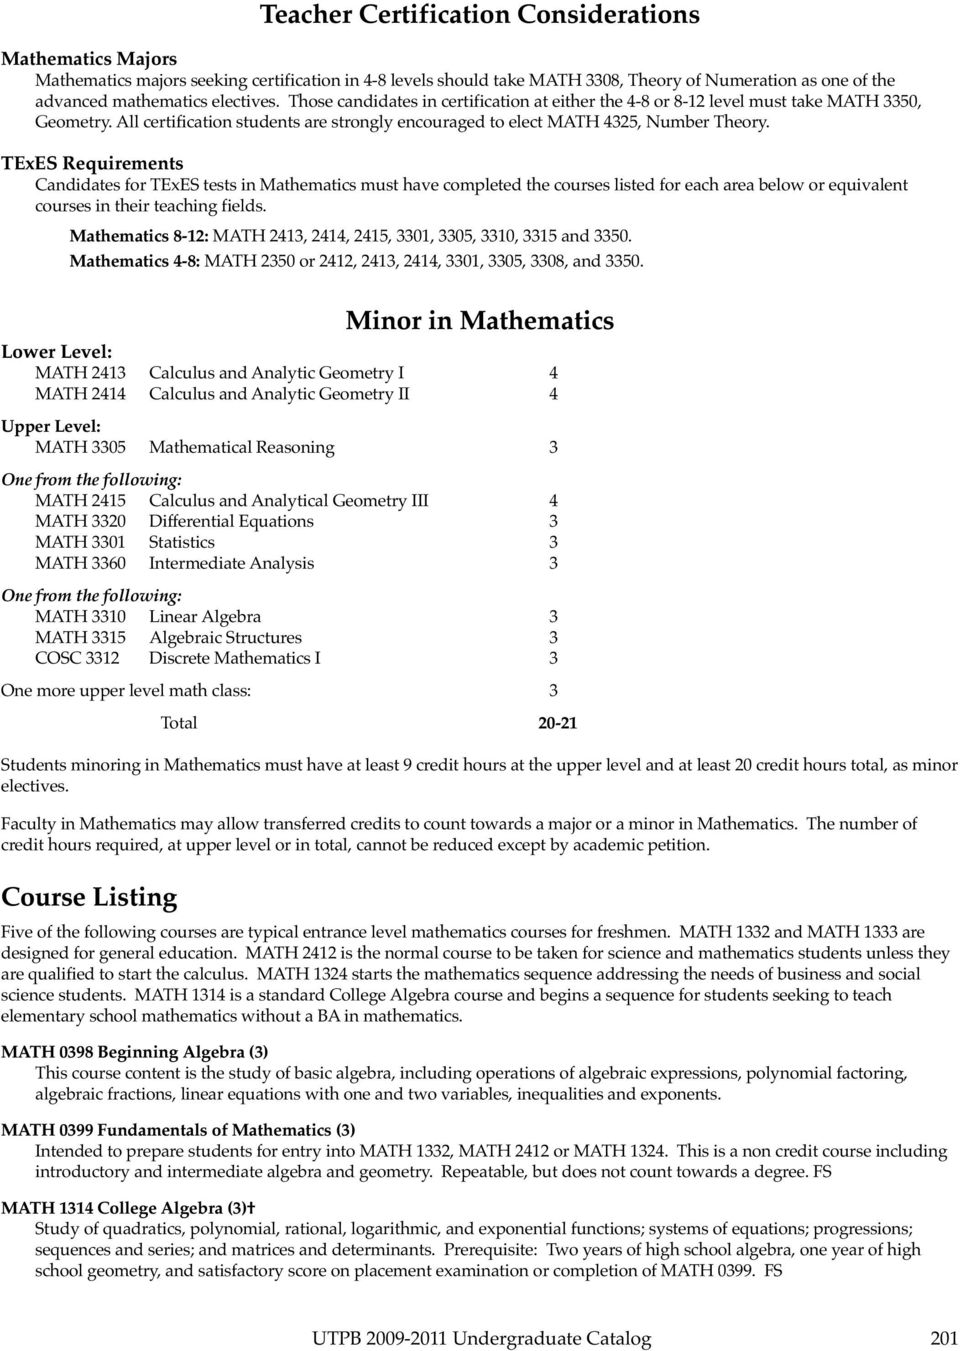 TExES Requirements Candidates for TExES tests in Mathematics must have completed the courses listed for each area below or equivalent courses in their teaching fields.